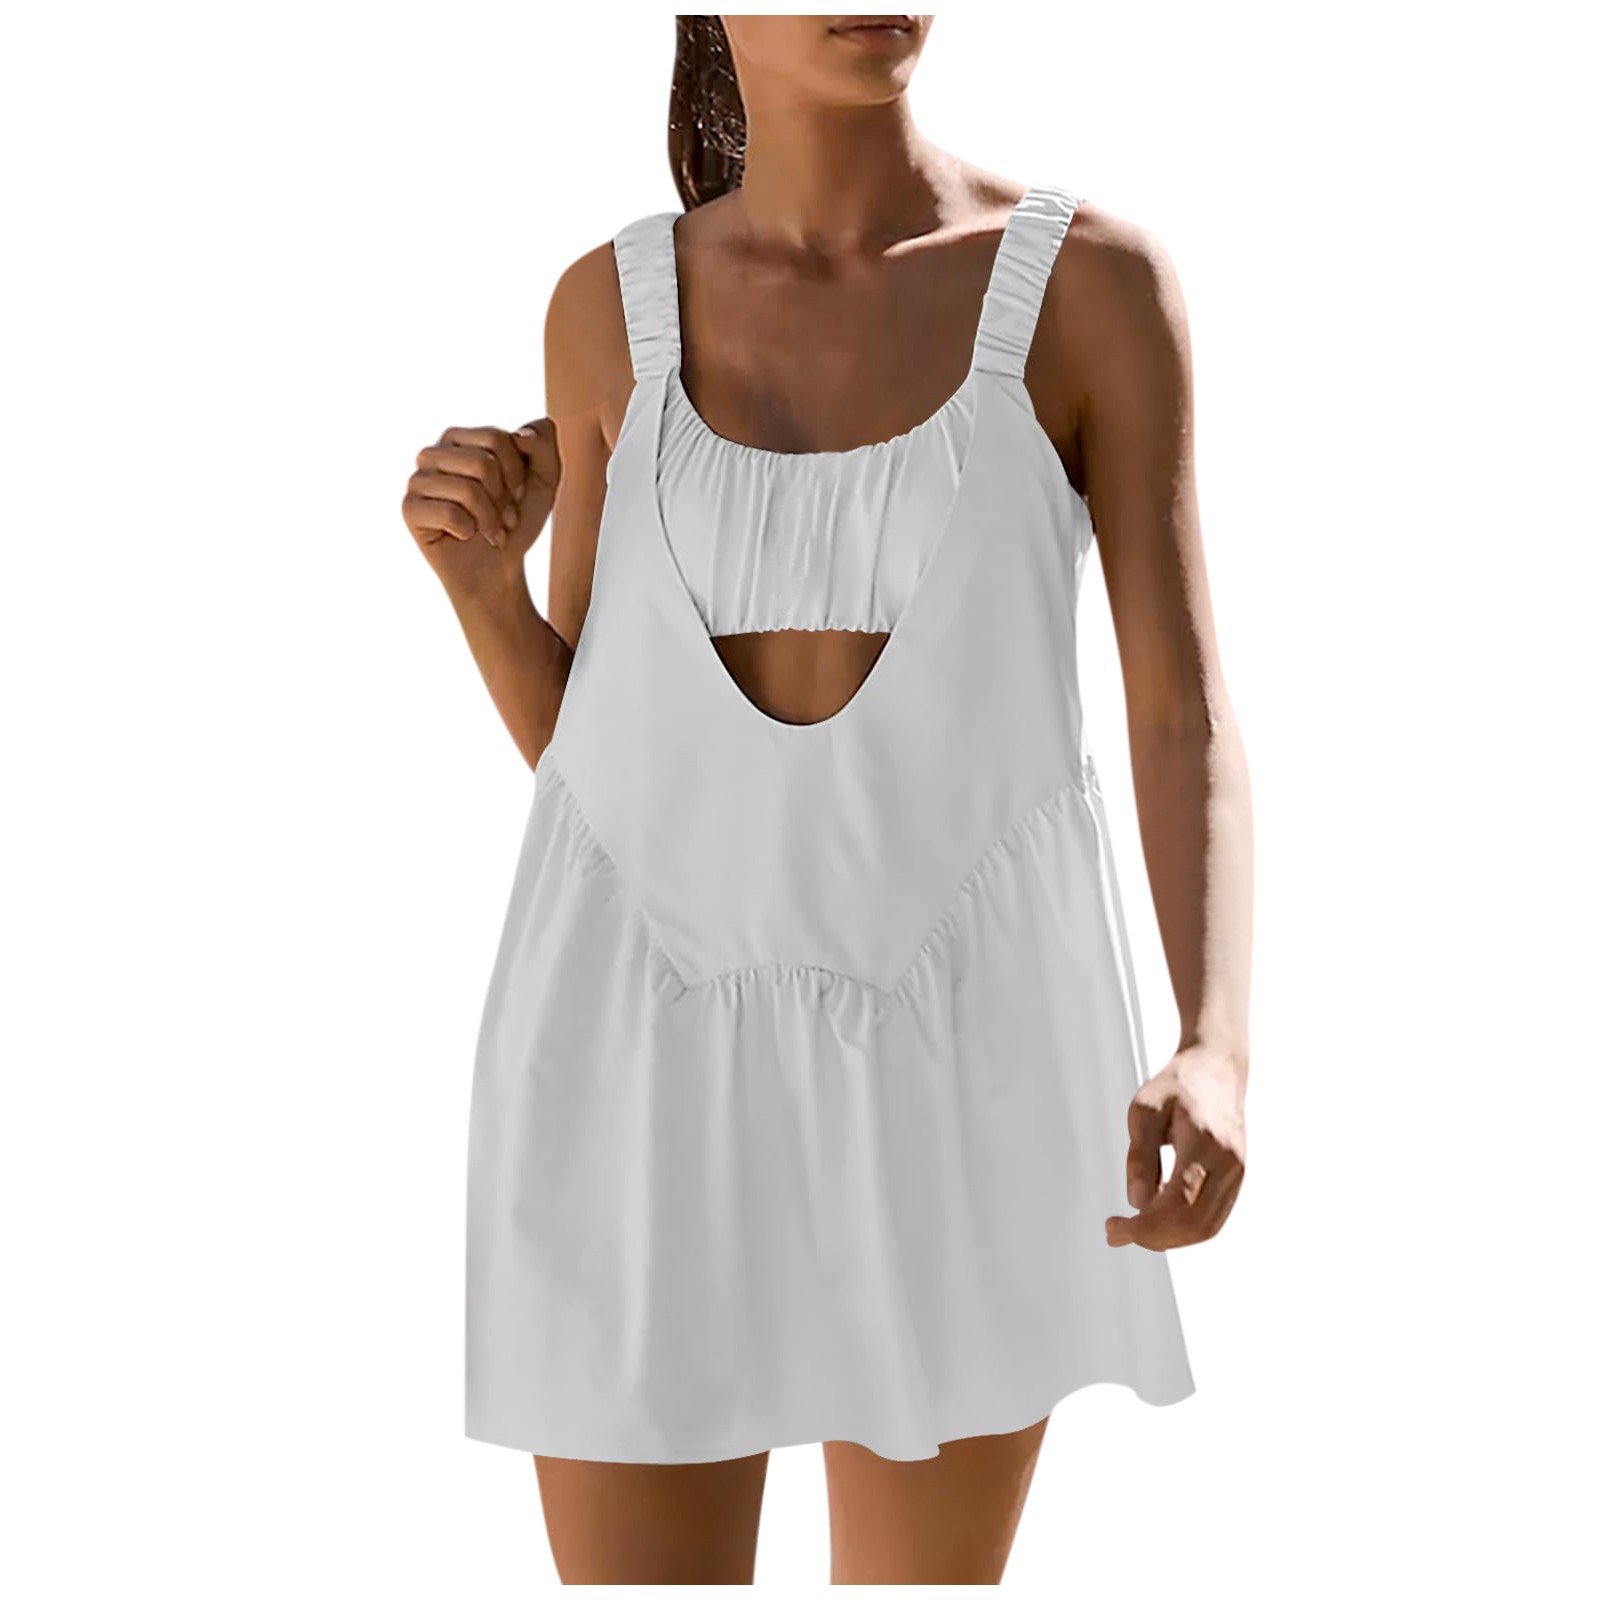 Tennis Dress Workout Mini Dress With Built In Bra Shorts Suit Golf Athletic  CA